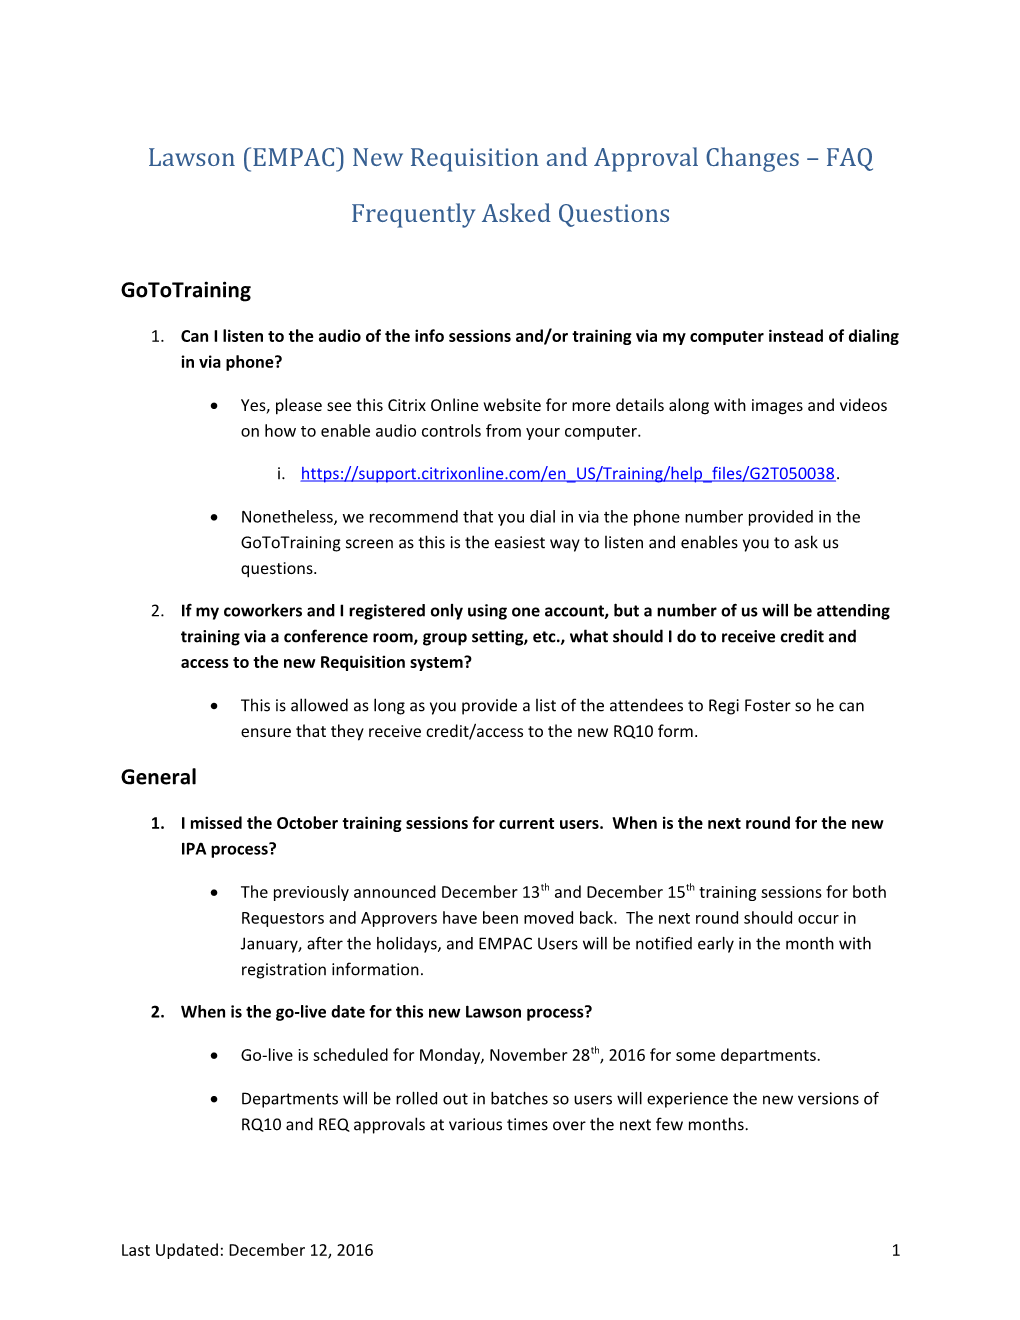 Lawson (EMPAC) New Requisition and Approval Changes FAQ